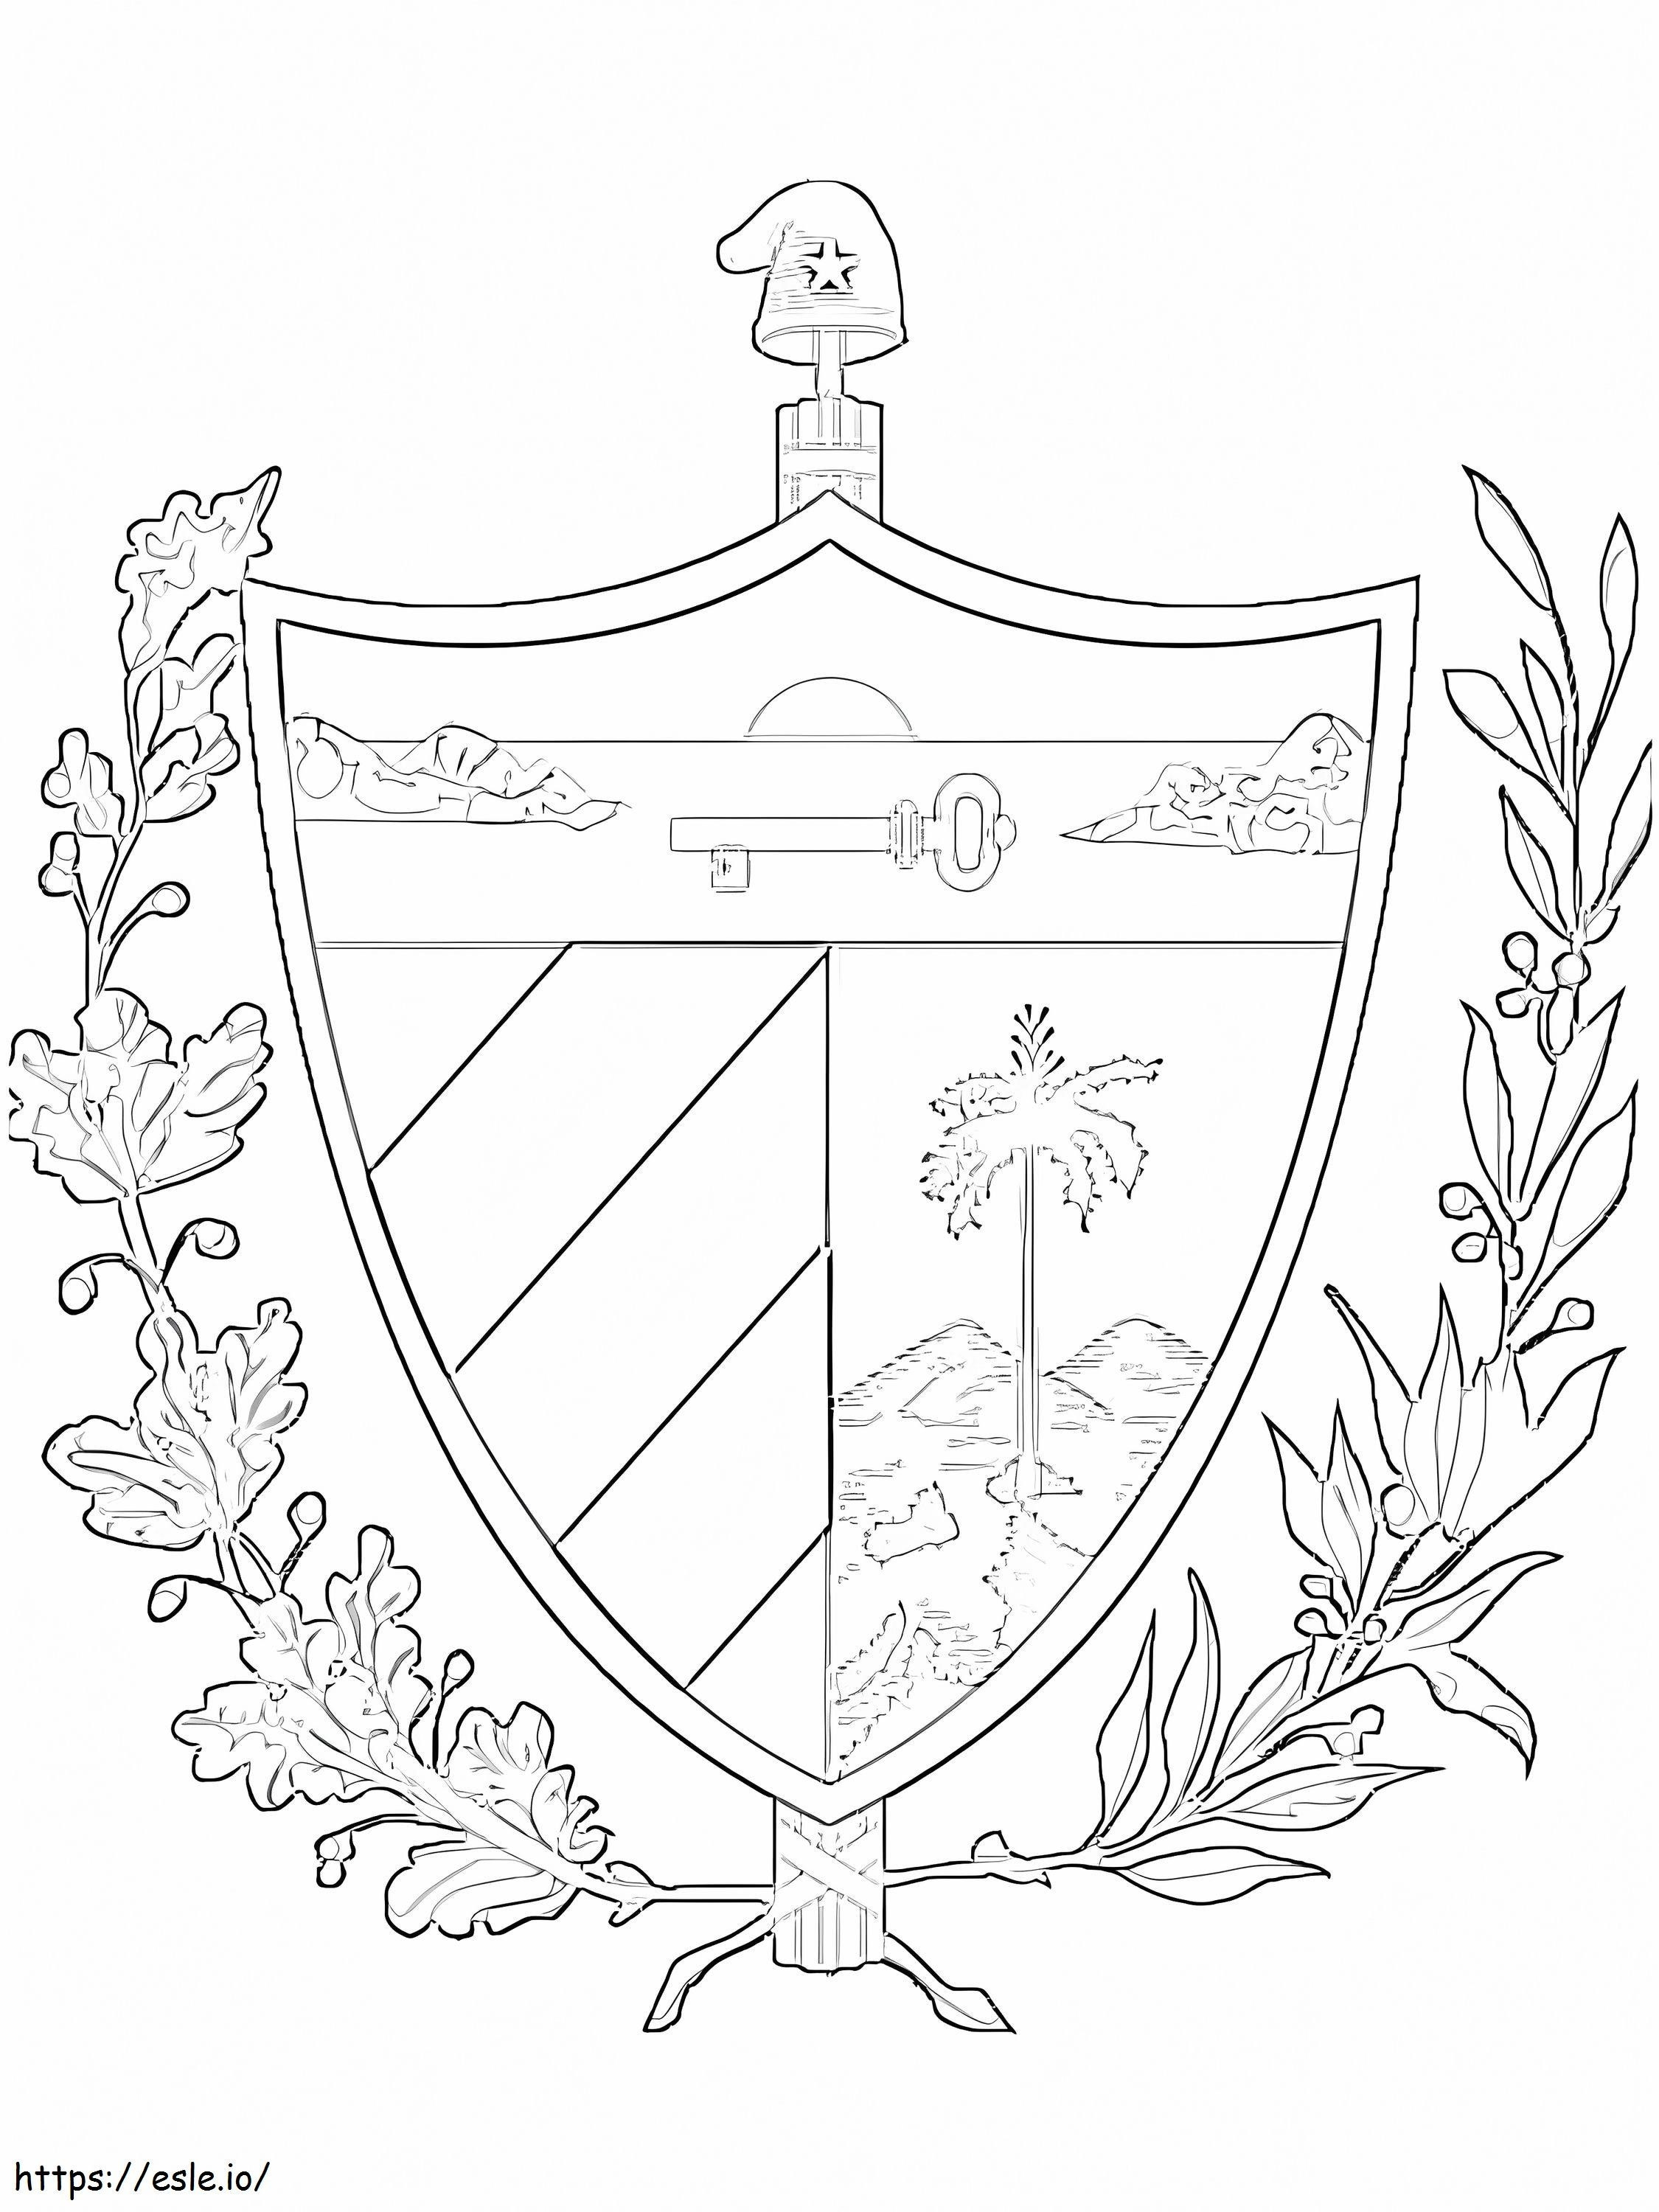 The Cuban Coat Of Arms coloring page